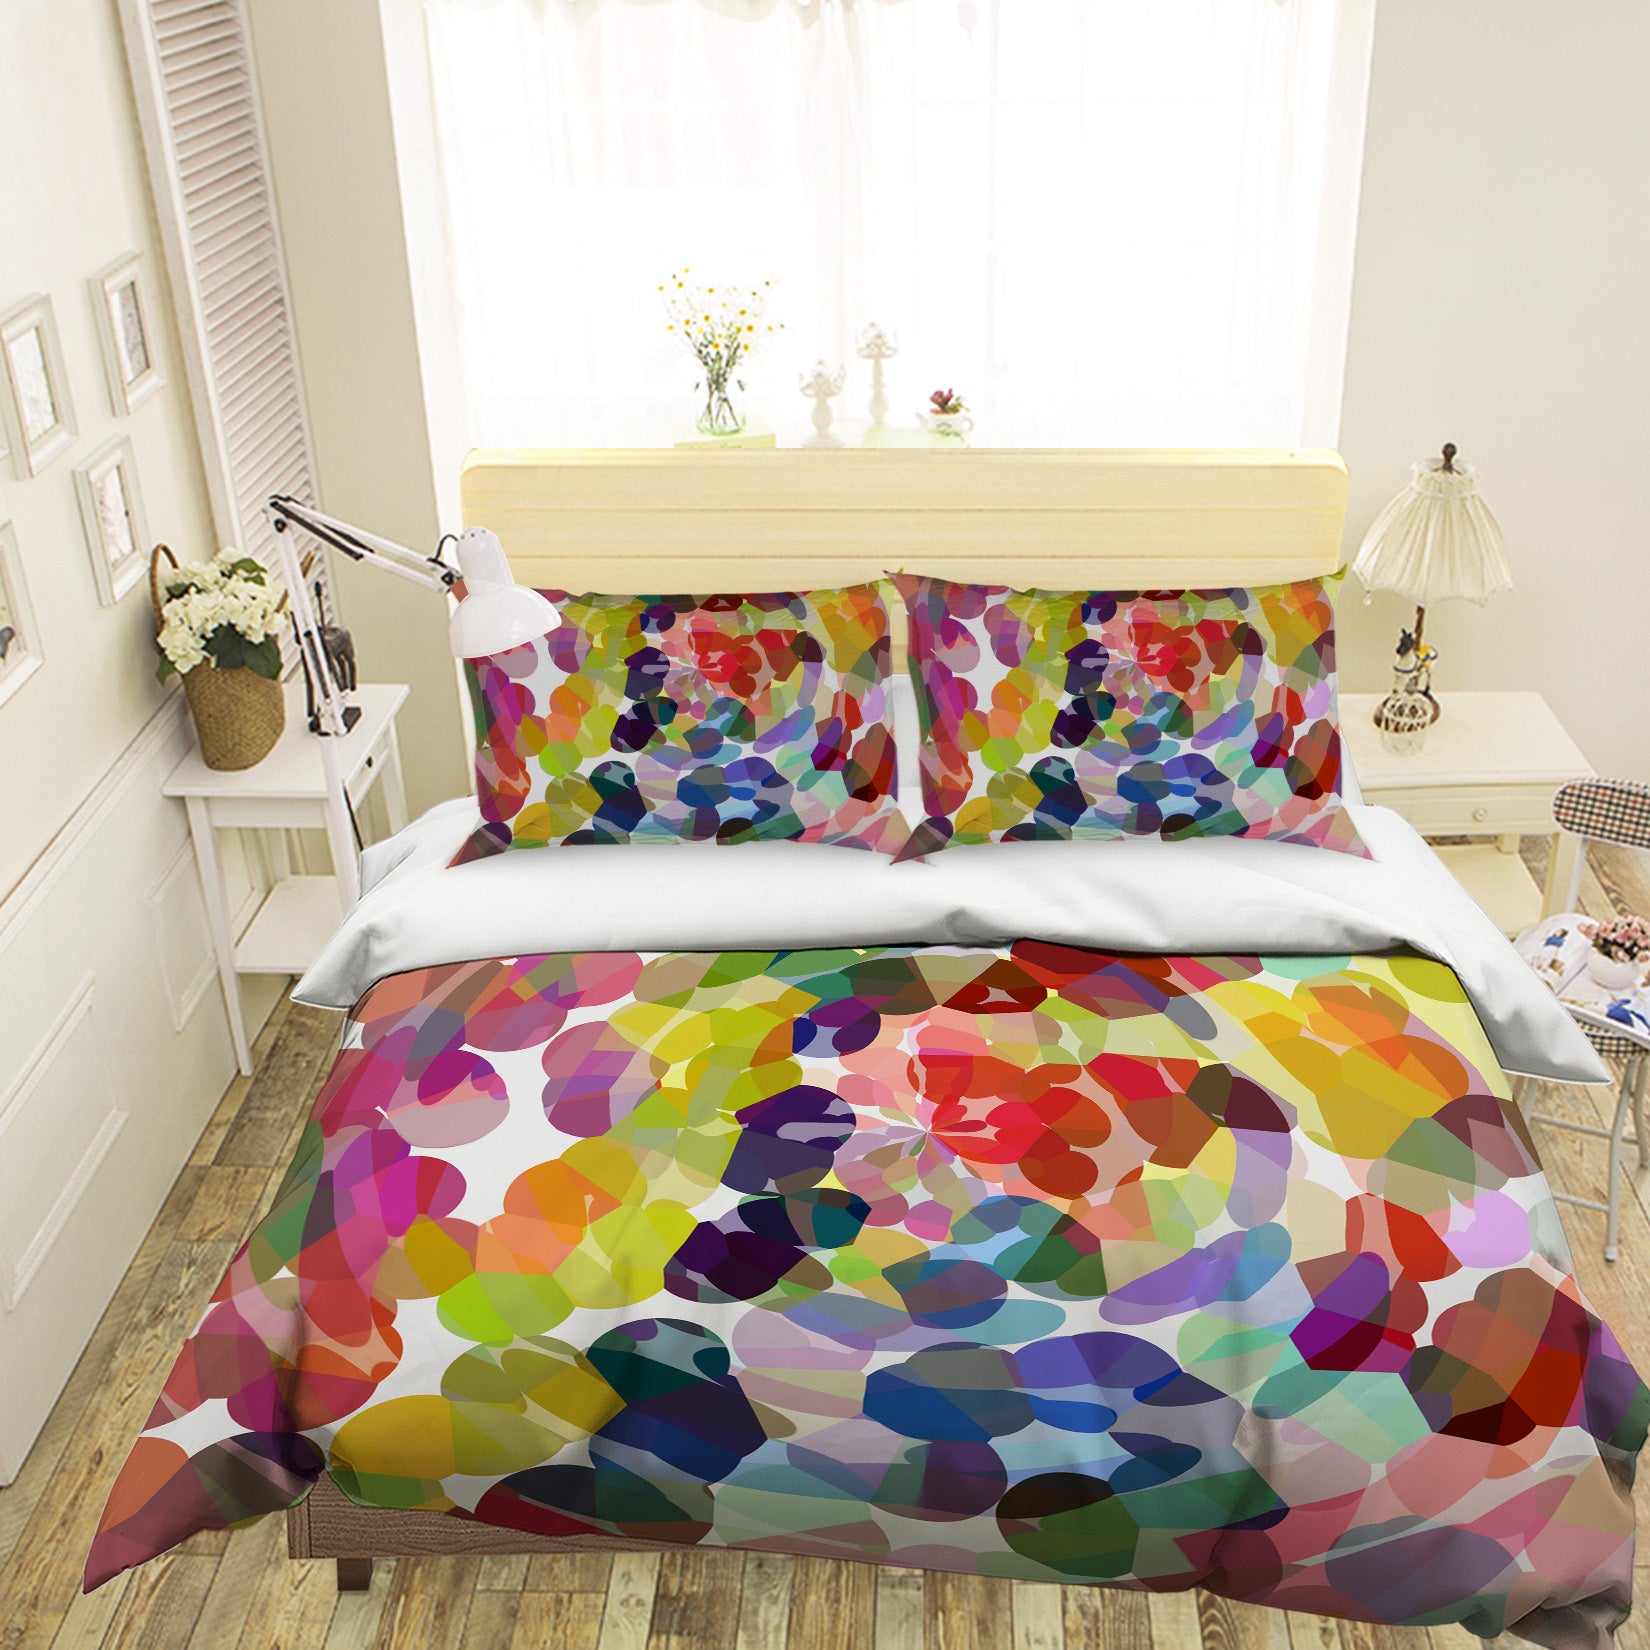 3D Colored Stones 2004 Shandra Smith Bedding Bed Pillowcases Quilt